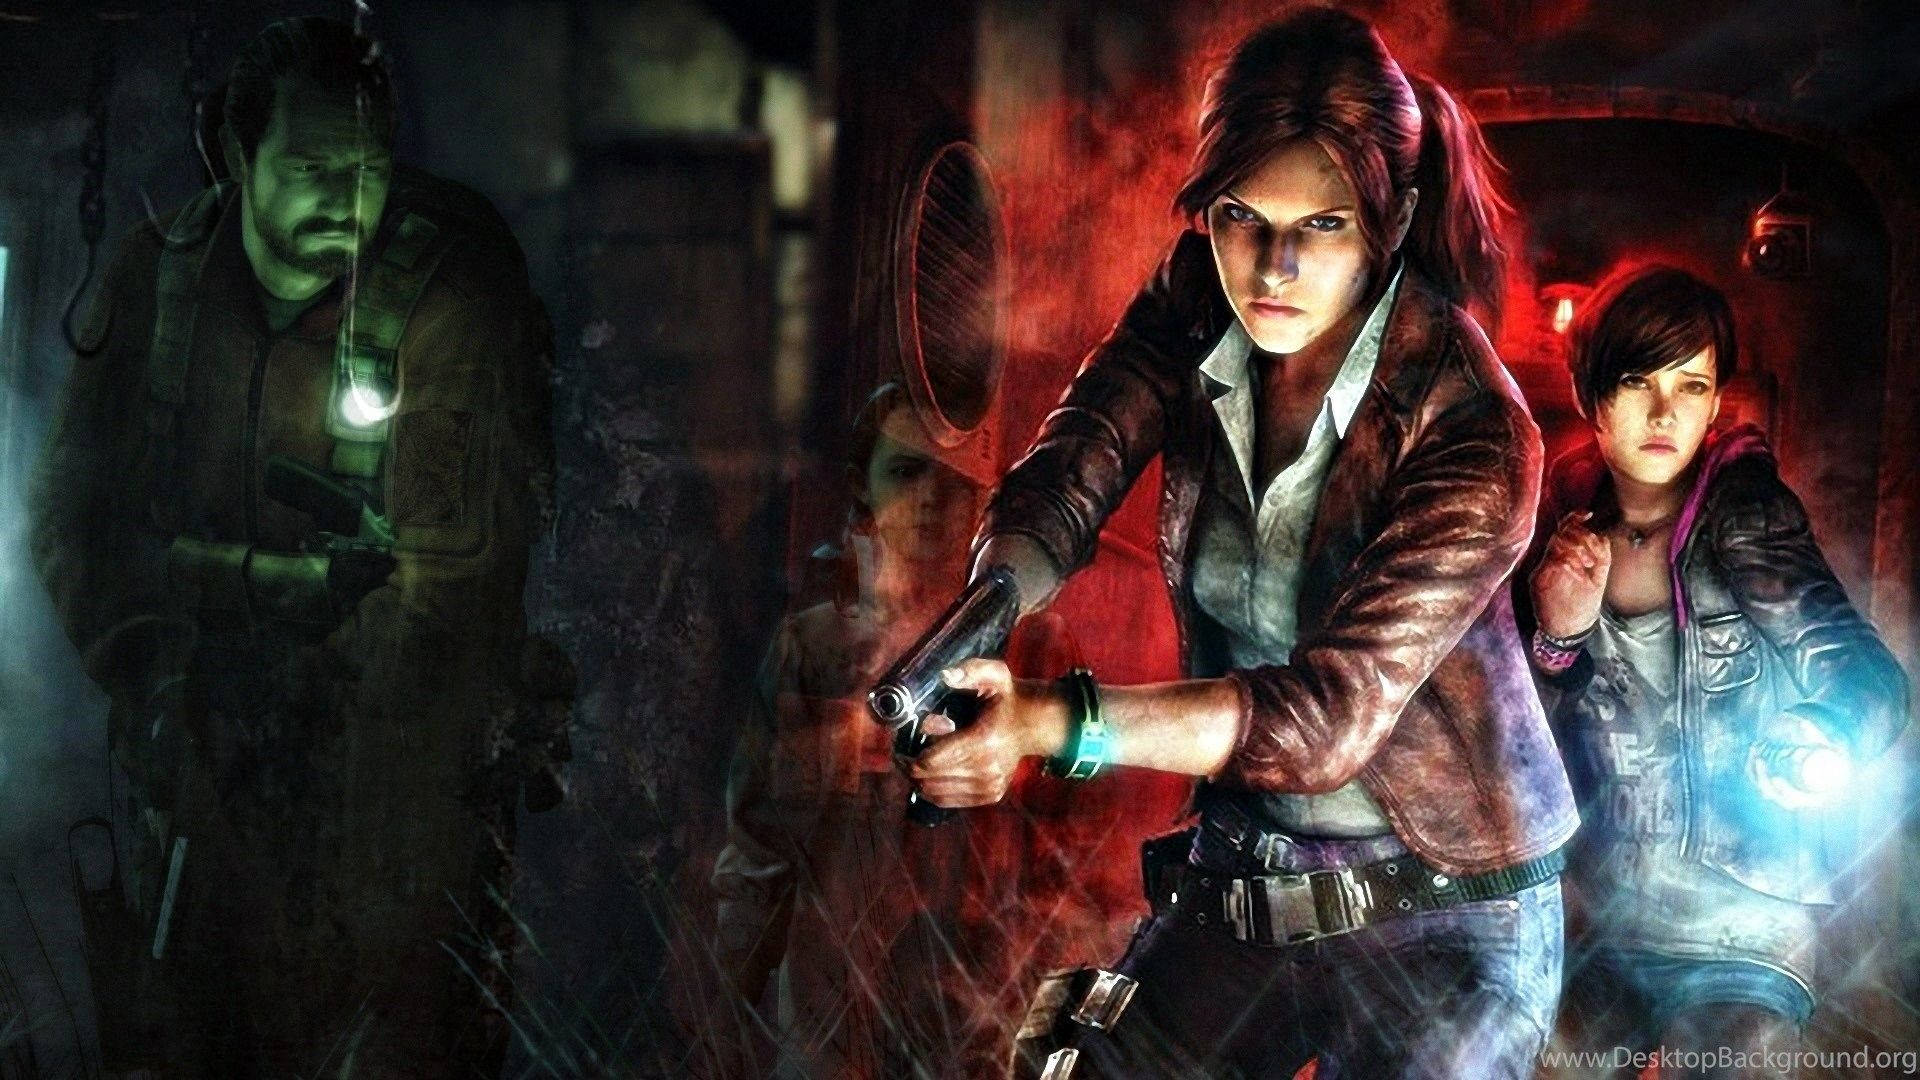 Heroes of the Apocalypse - Leon Kennedy, Claire Redfield and Ada Wong stand strong in the face of danger. Wallpaper